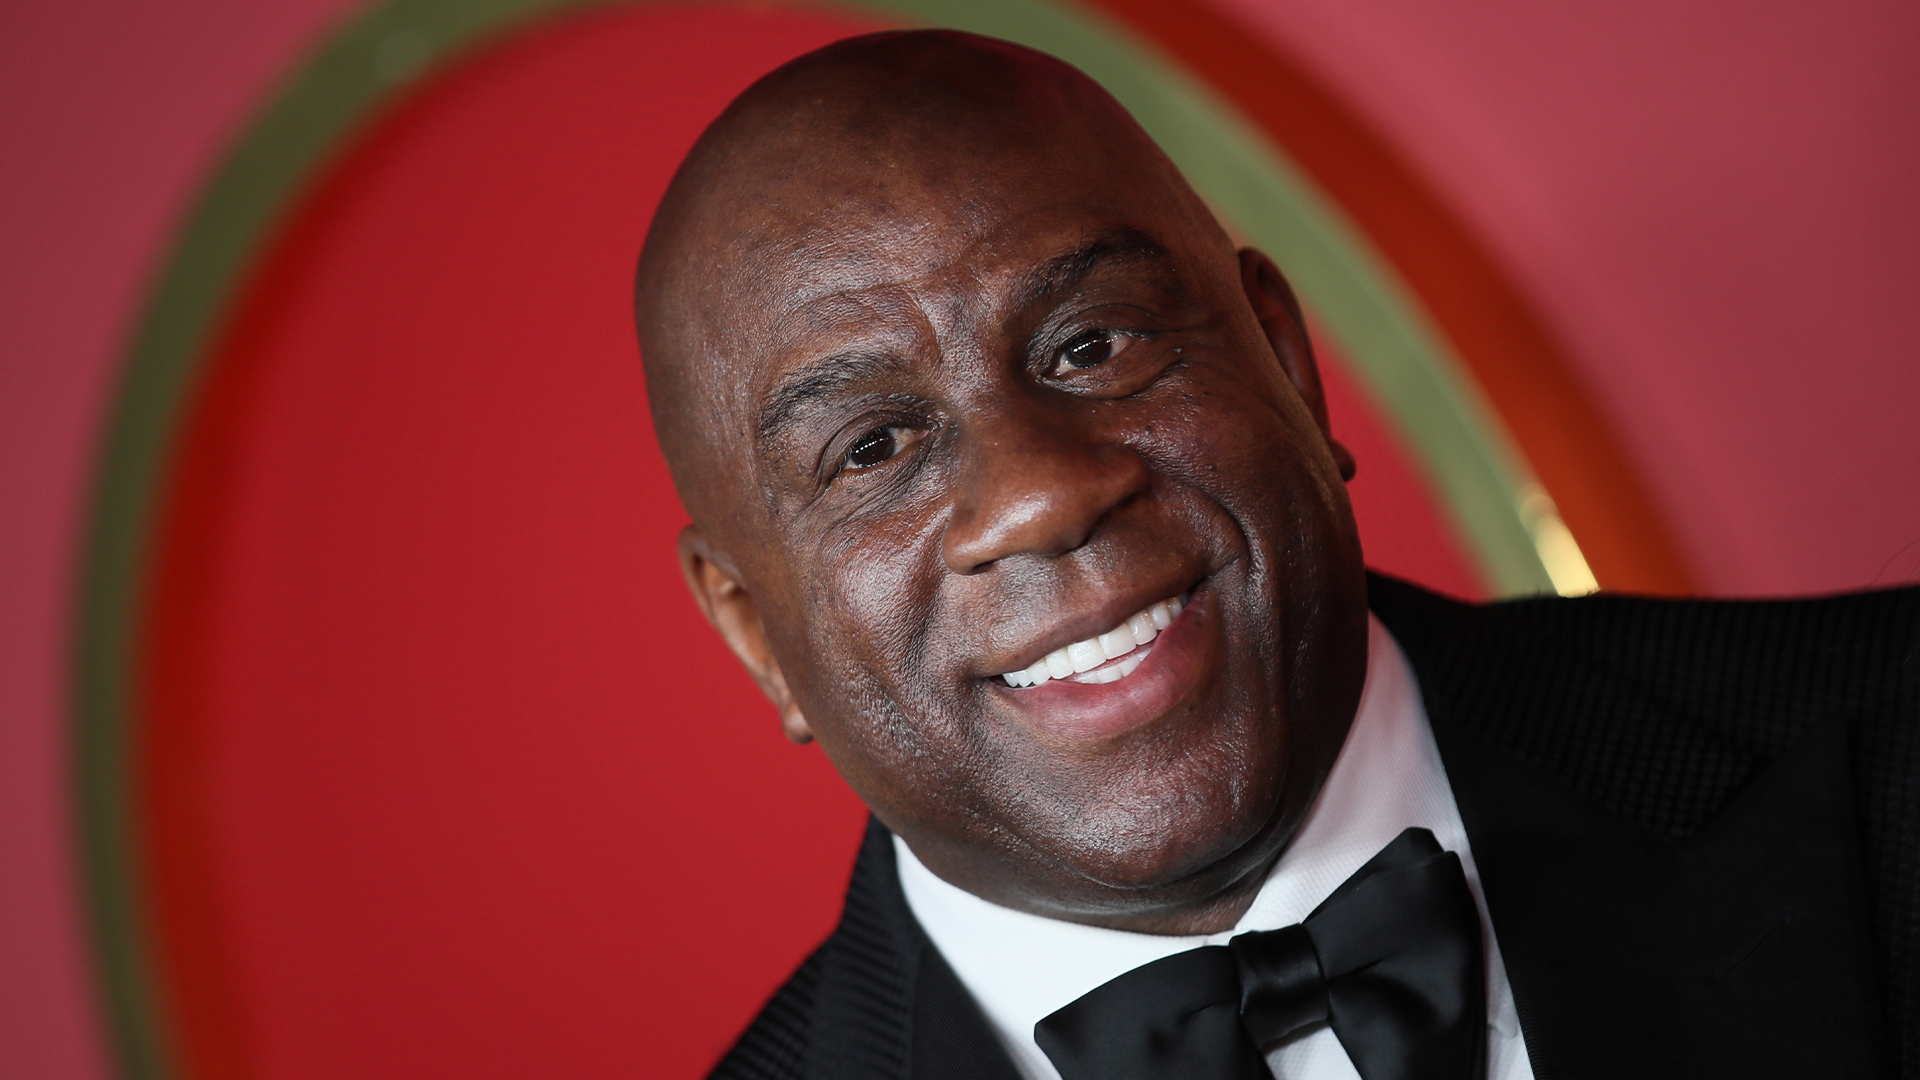 Magic Johnson Joins Investment Group To Buy Washington Commanders, Report Says